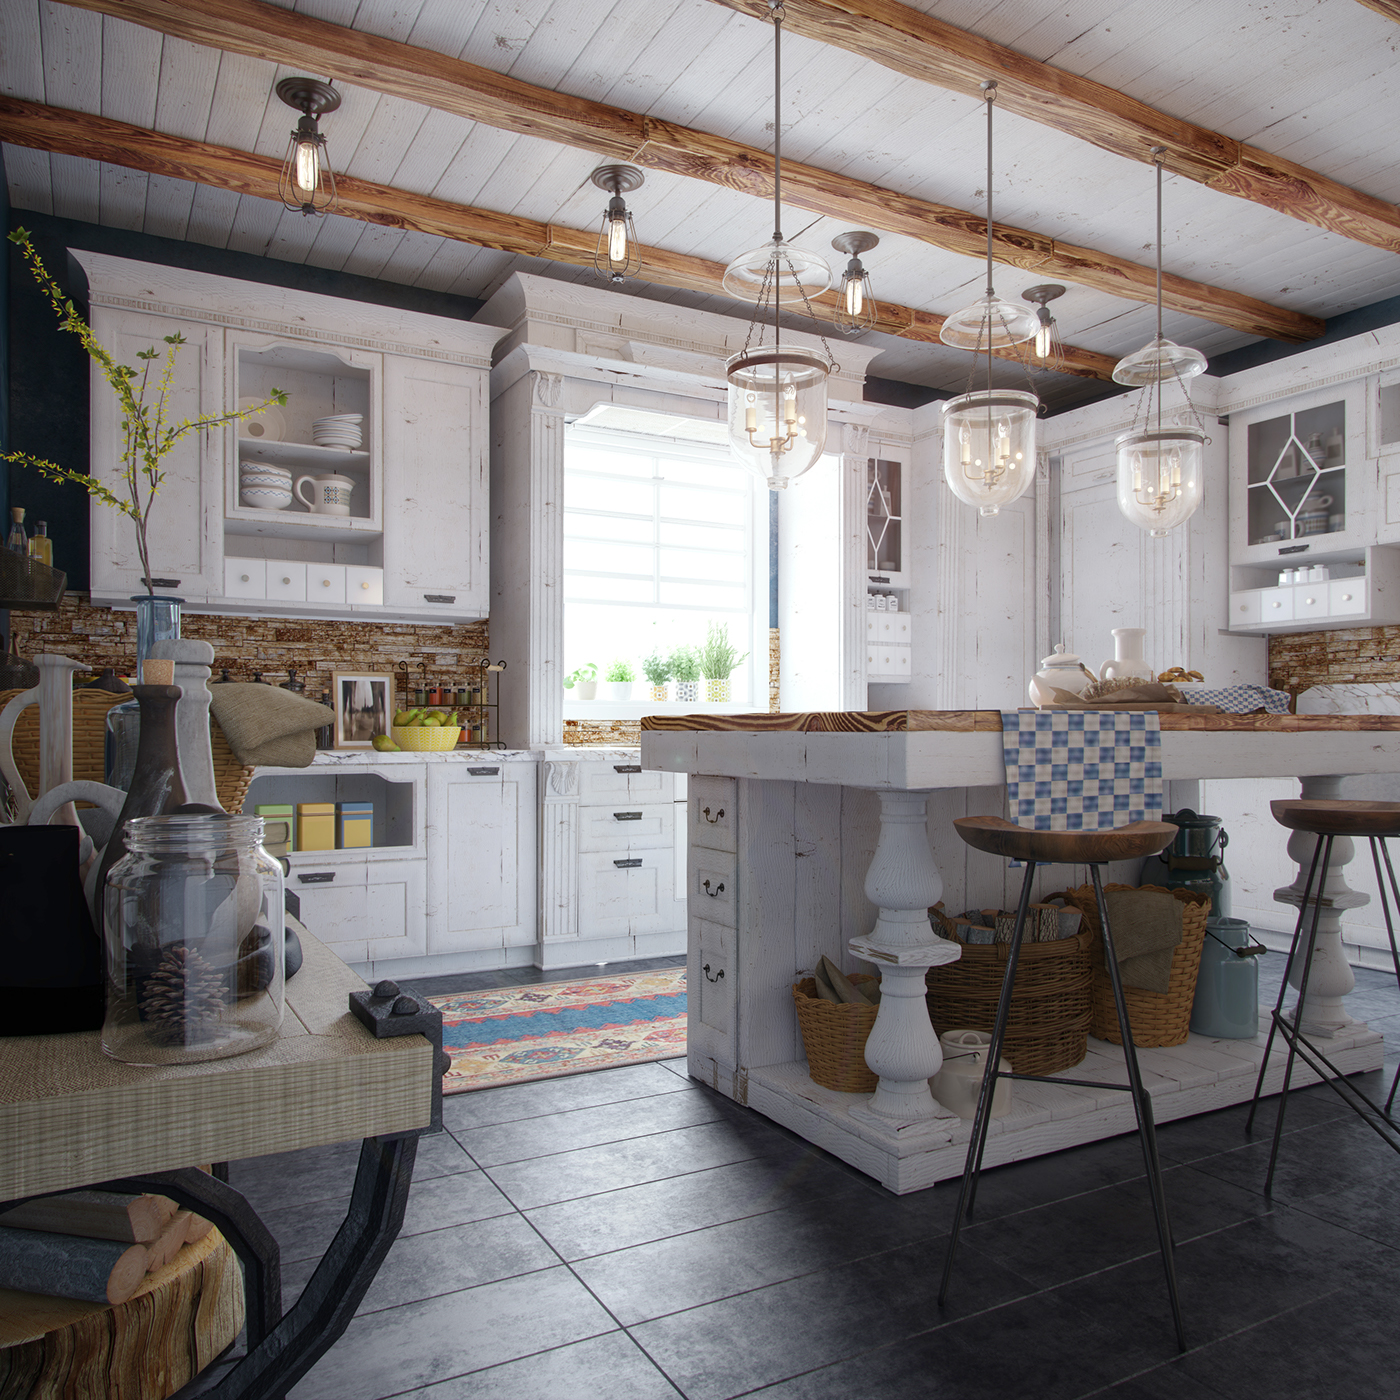 Countryside Kitchens: Rustic Decor Ideas For The Culinary Heart